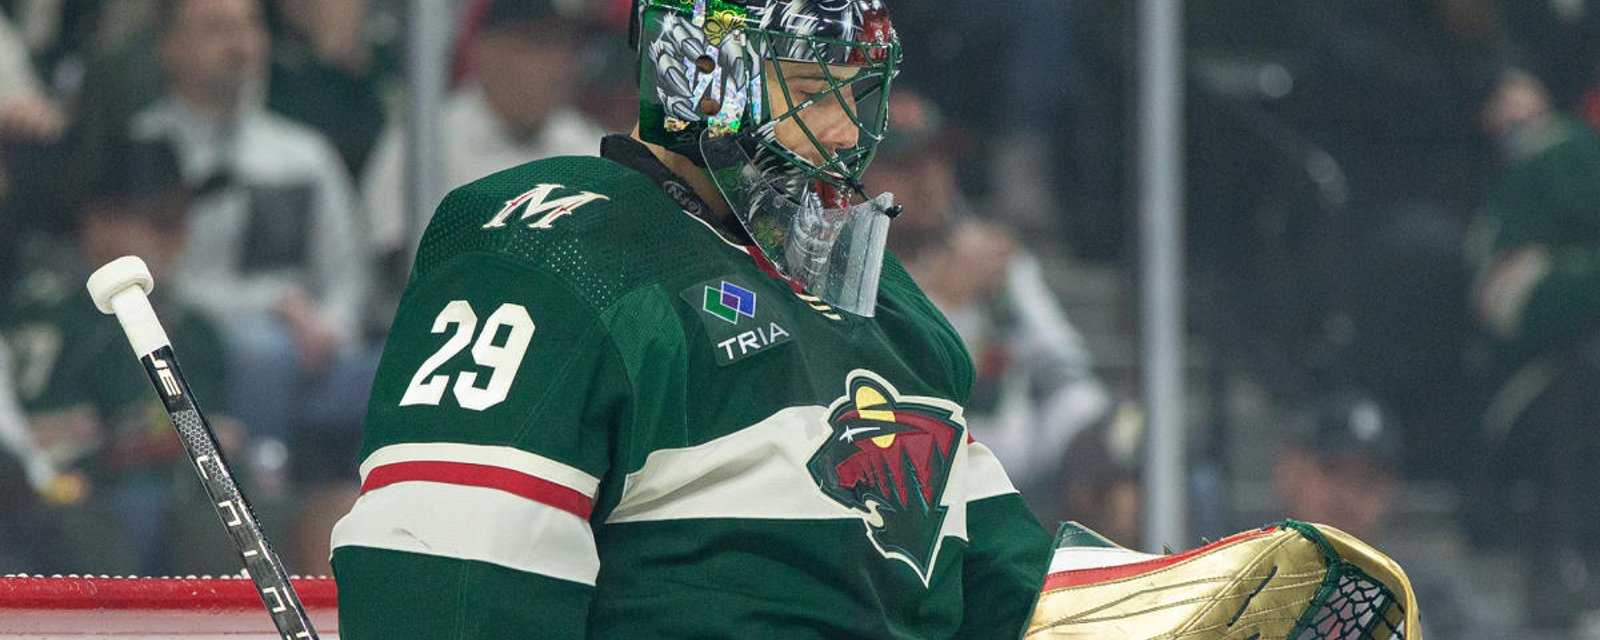 Wild has decided the fate of Marc-Andre Fleury!